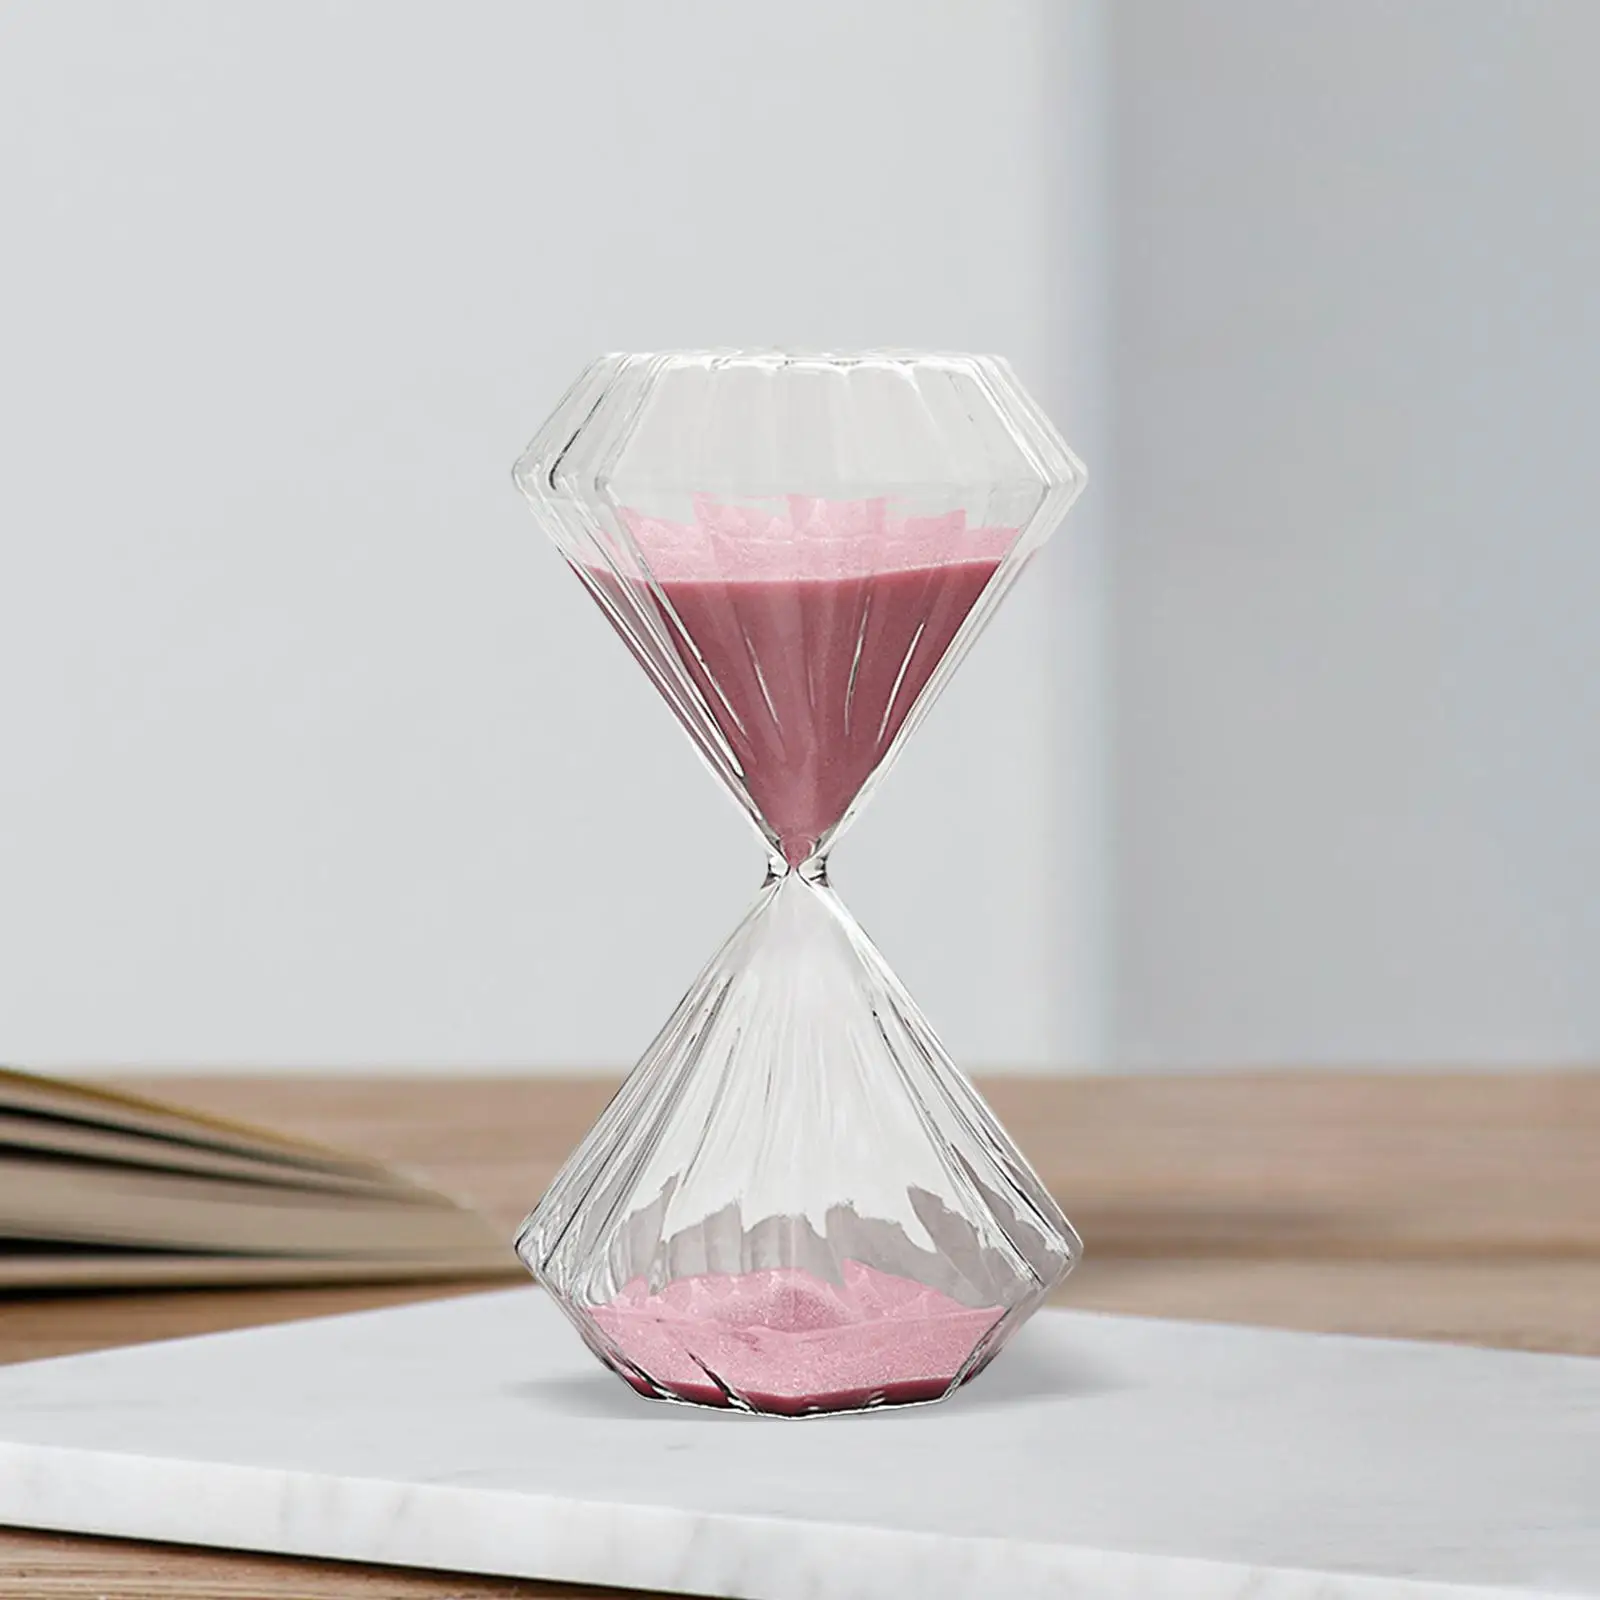 Sand Glass Timer Hourglass 30 Minutes Pink Sand Kitchen Accessories Sand Timer Workout Timer Tabletop Decoration for Living Room